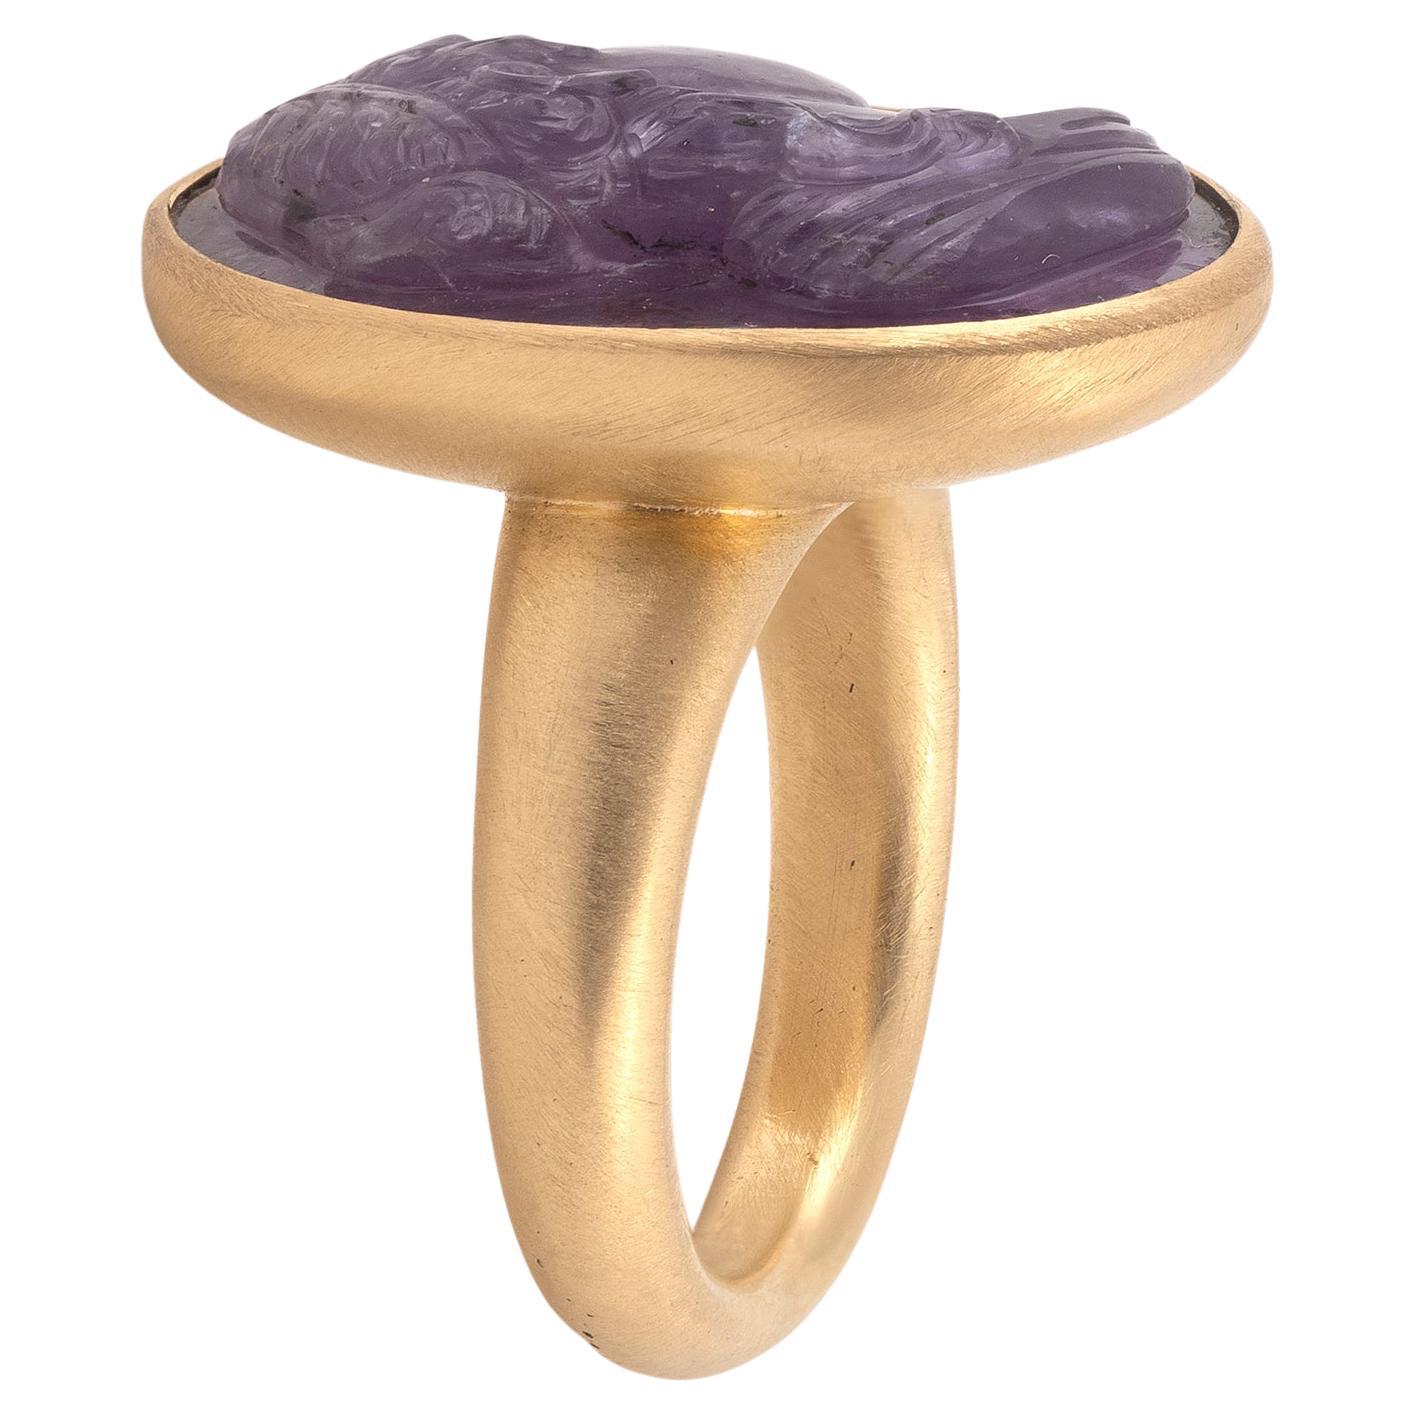 19th-century amethyst cameo of the bust of Niobe looking to the right, in a gold ring.
Top size 26mm x 20mm
Finger size: 7 1/4
Weight: 18,82gr.

In Greek mythology, Niobe was a daughter of Tantalus and of either Dione, the most frequently cited, or